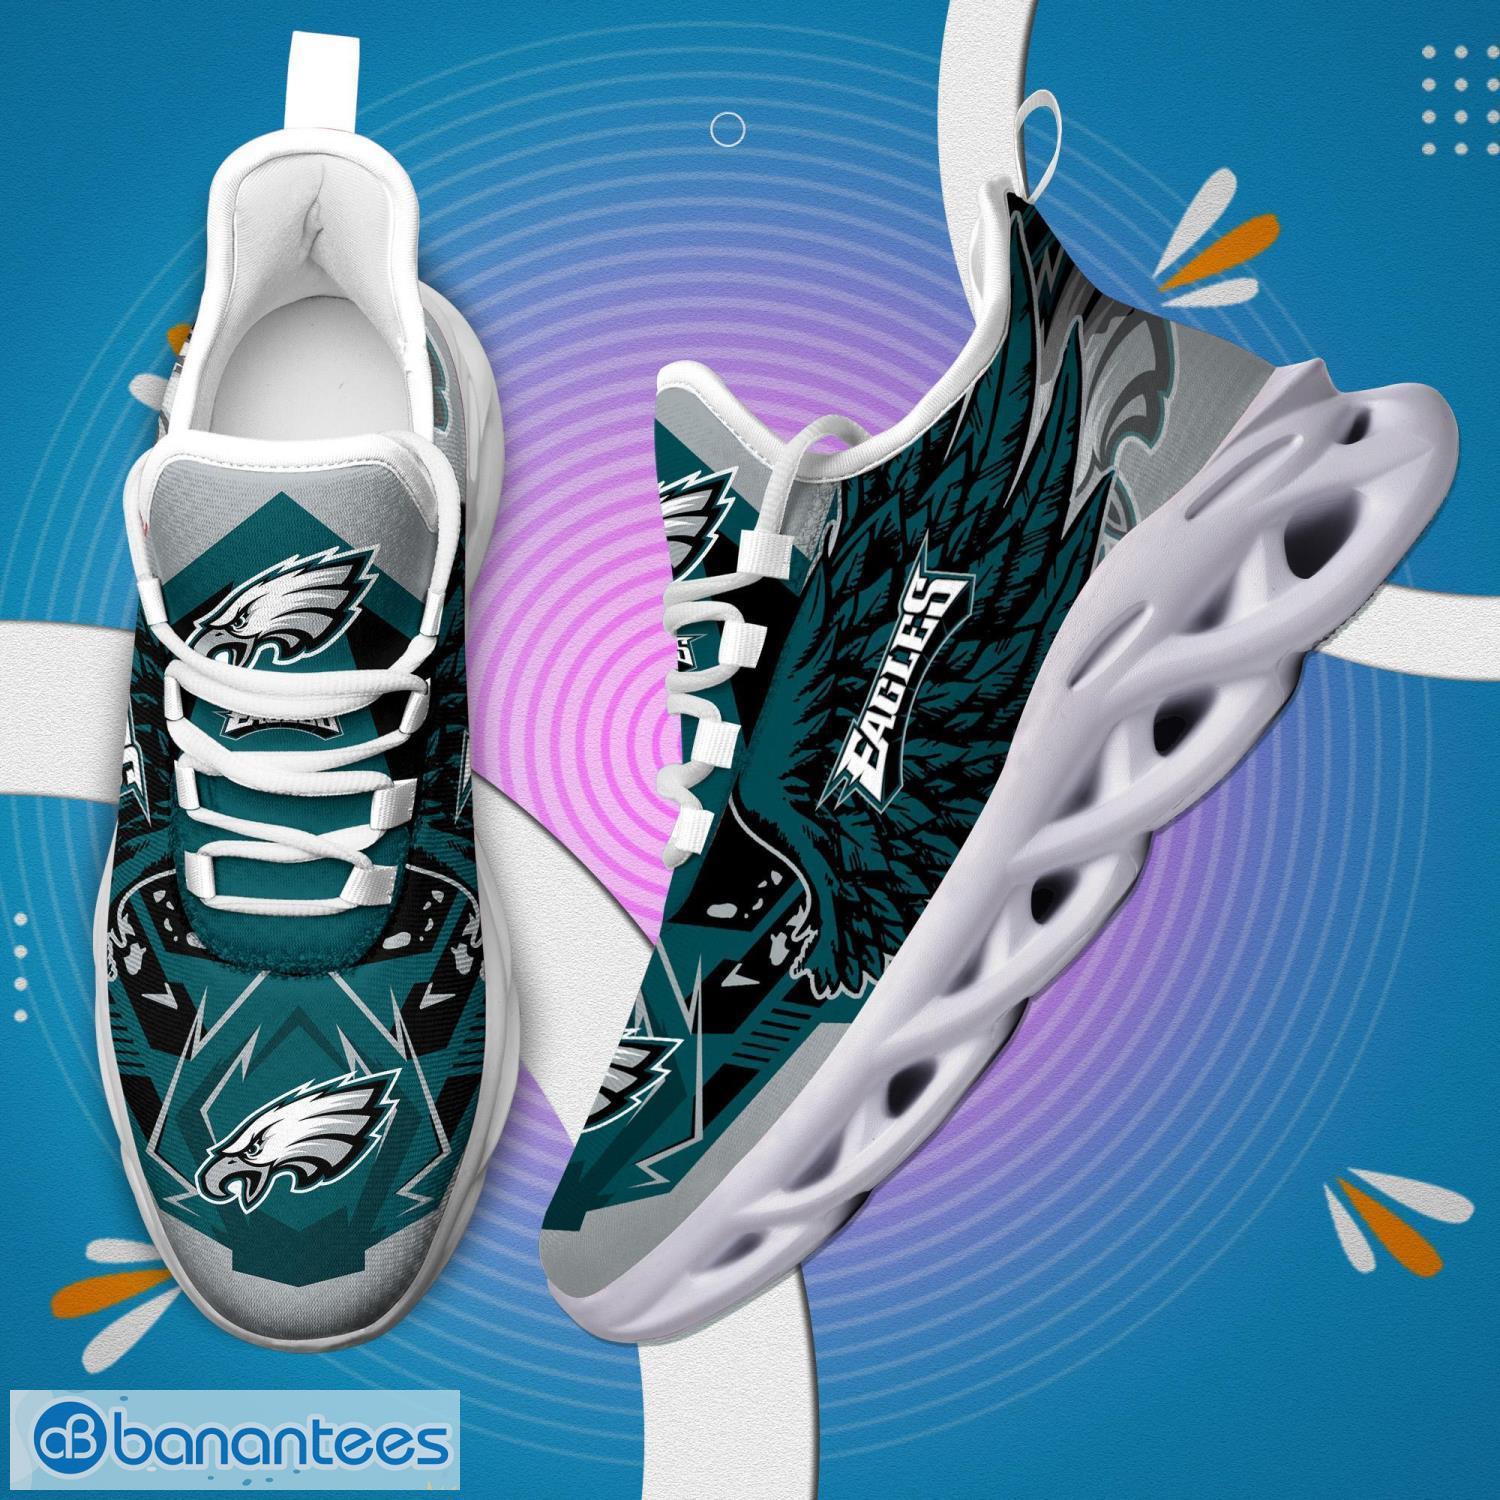 Just In Time For Kickoff, Check Out These New Nike Eagles Sneakers - CBS  Philadelphia